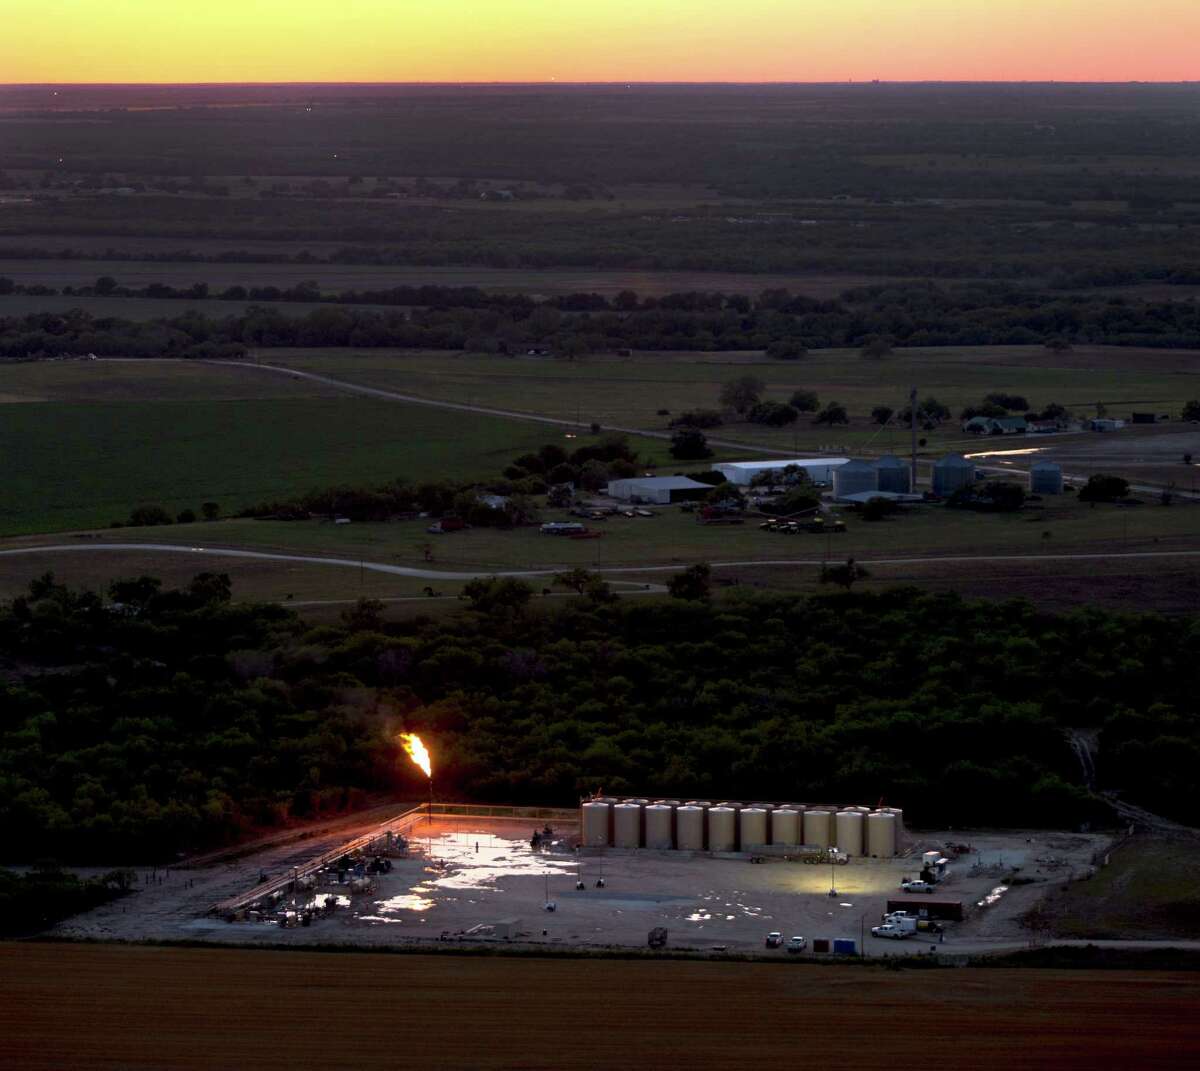 An oil production flare, also called a flare stack, is seen in a Wednesday, May 14, 2014 aerial image taken near Karnes City, Texas.